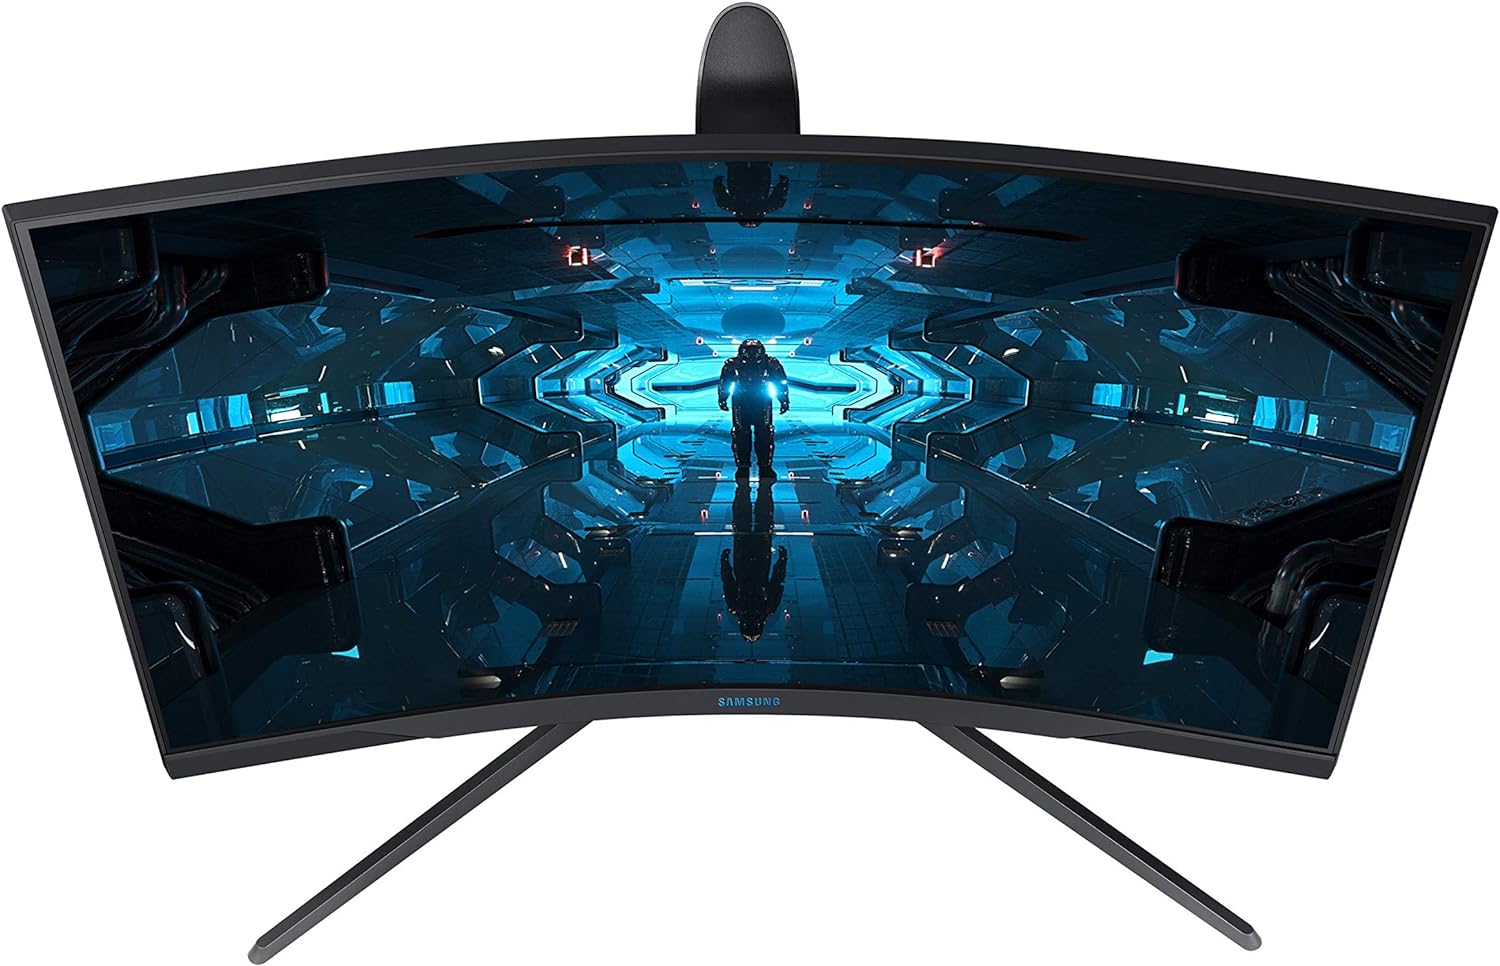 Samsung Odyssey G7 LC27G73TQSRXXU 27" 1000R Curved Gaming Monitor - 240Hz, 1ms, 1440p QHD, Gsync, QLED, HDR600, HDMI, Displayport, USB, Black   Import  Single ASIN  Import  Multiple ASIN ×Product customization General Description Galle - Amazing Gadgets Outlet